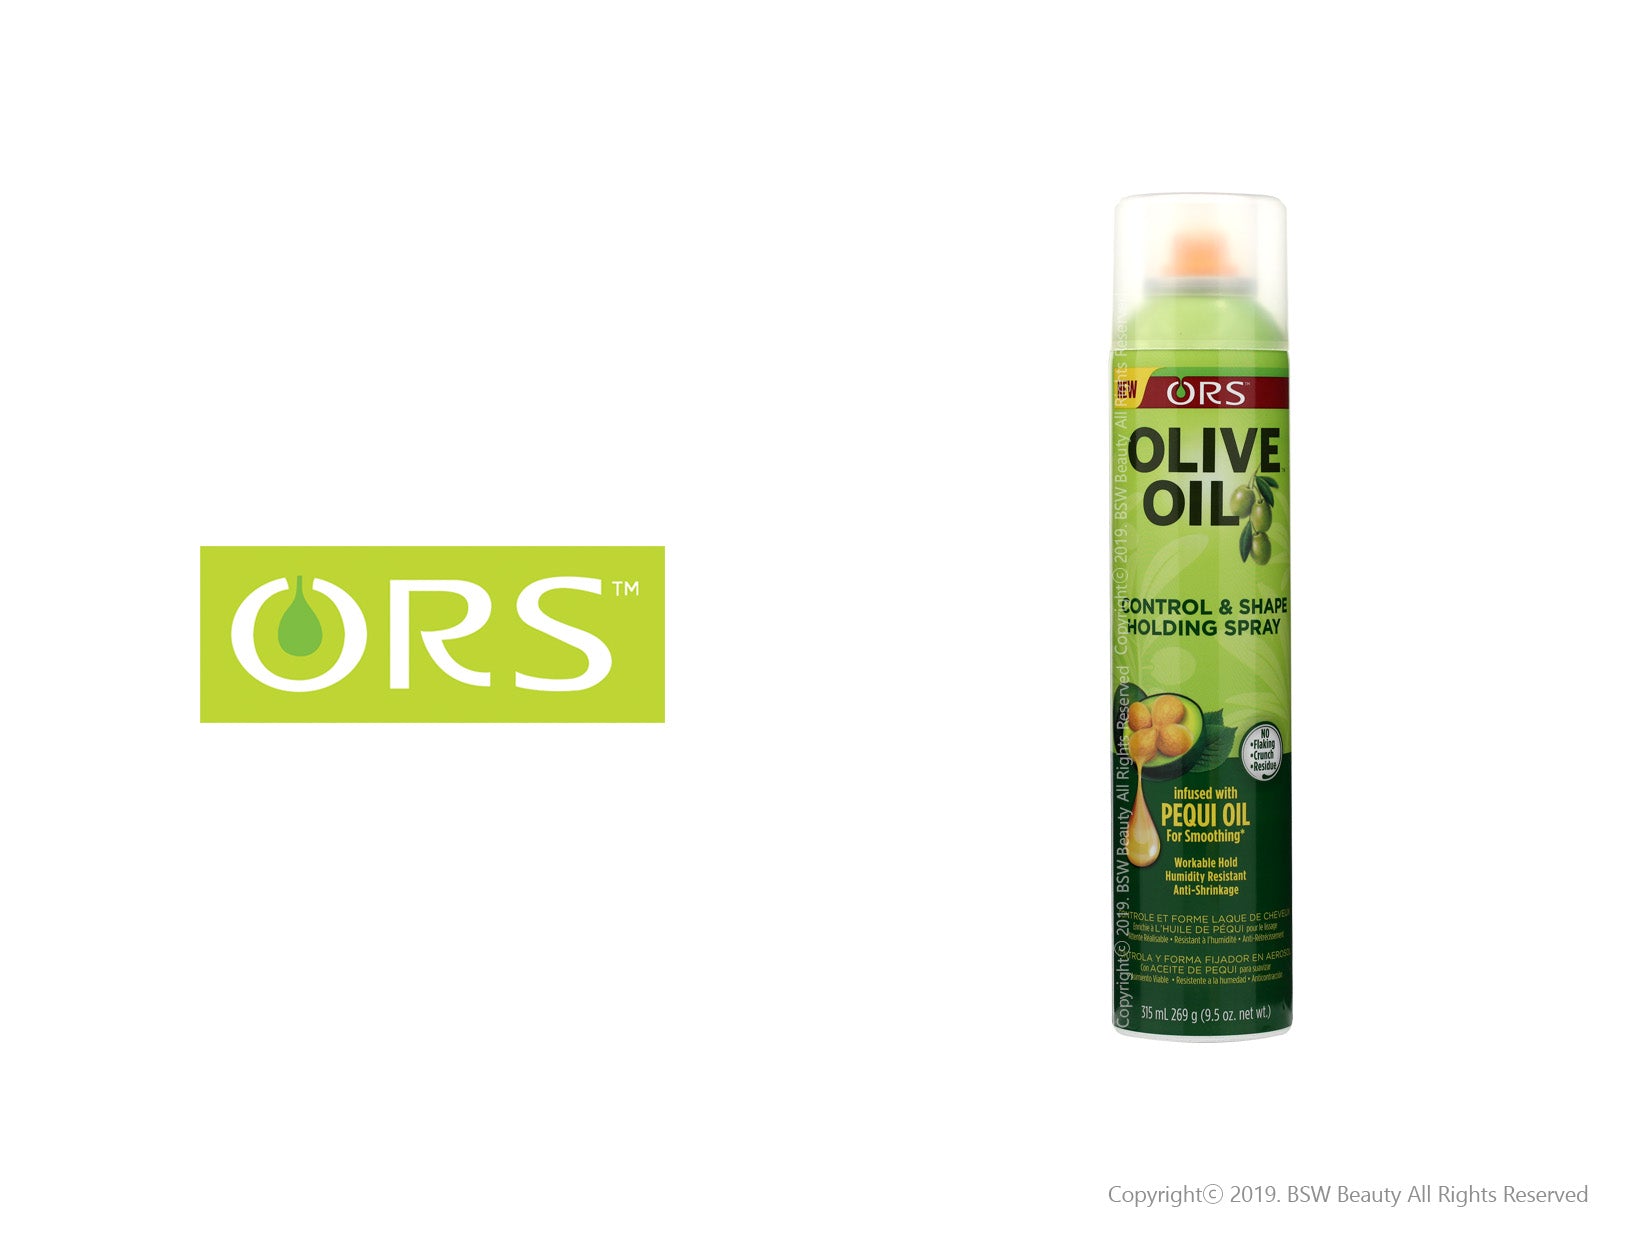 ORS OLIVE OIL CONTROL & SHAPE HOLDING SPRAY 9.5oz